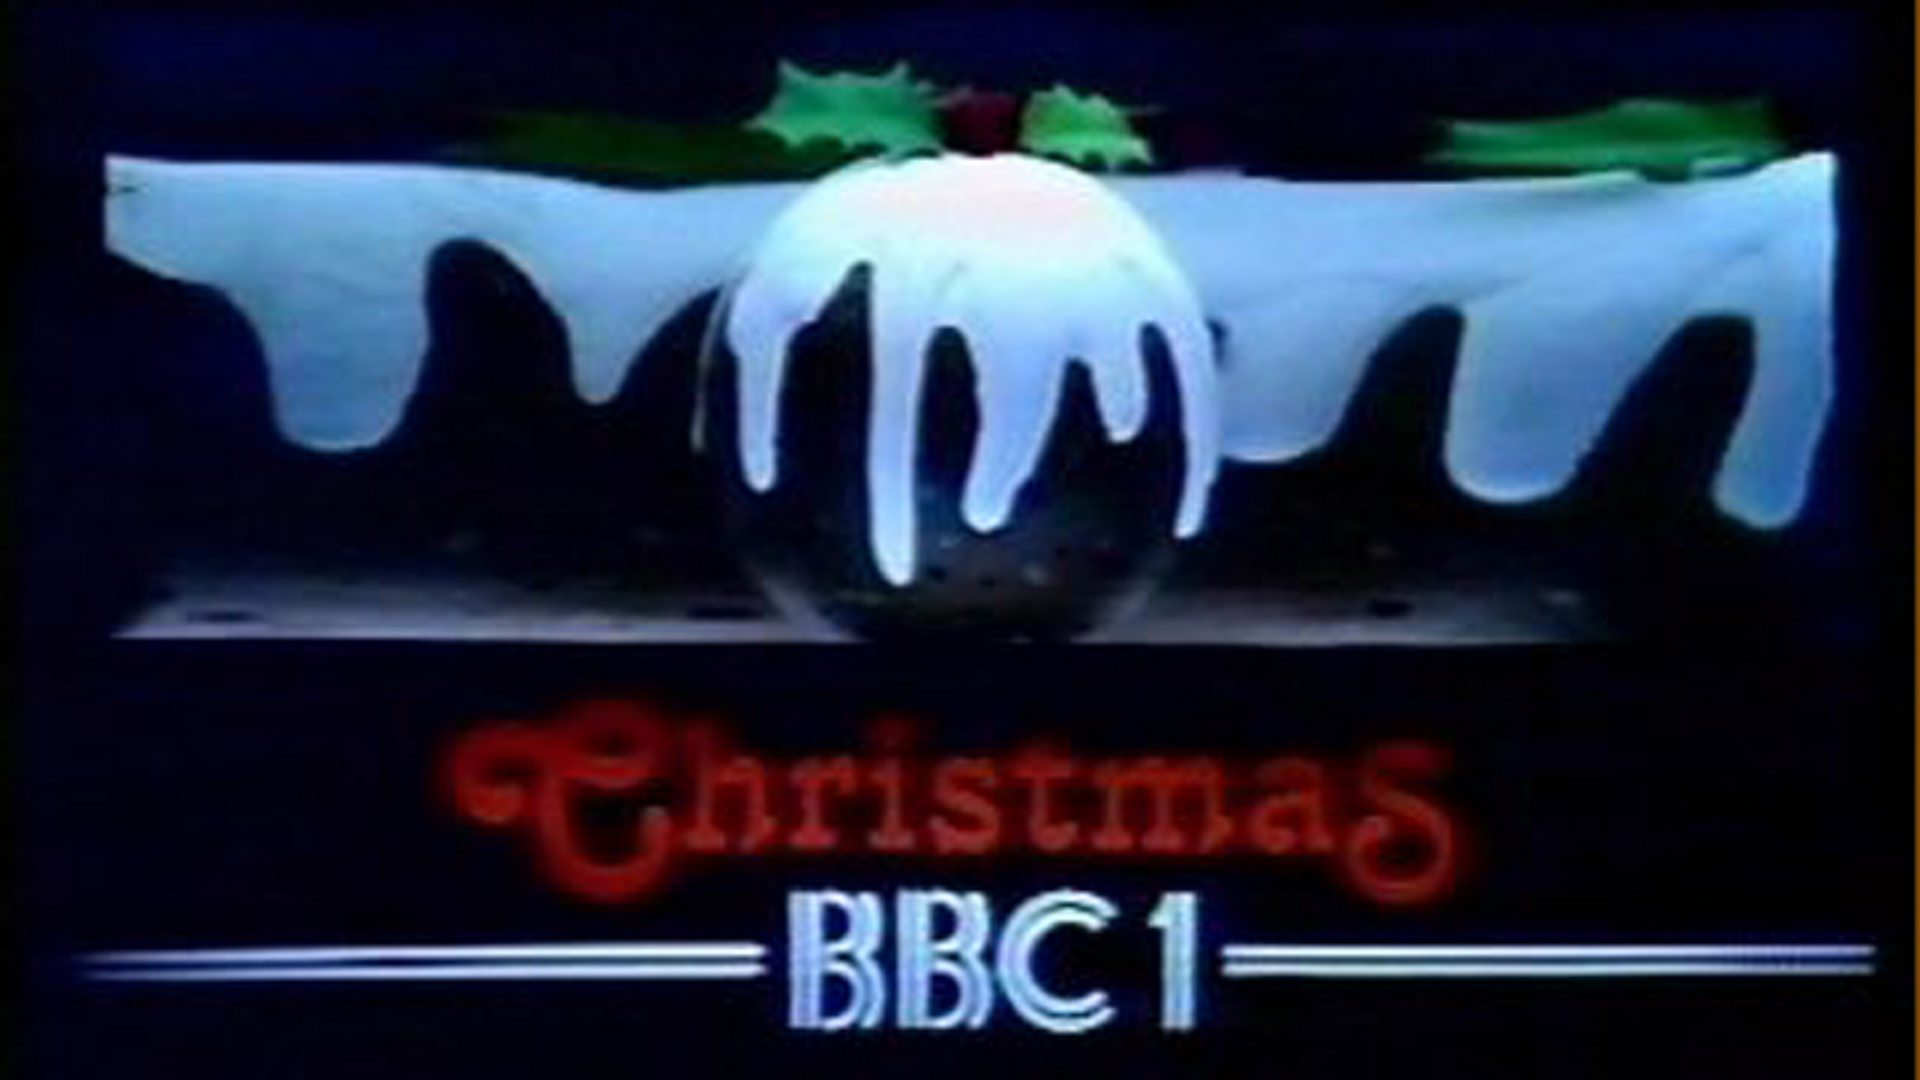 BBC Christmas Idents History of the BBC